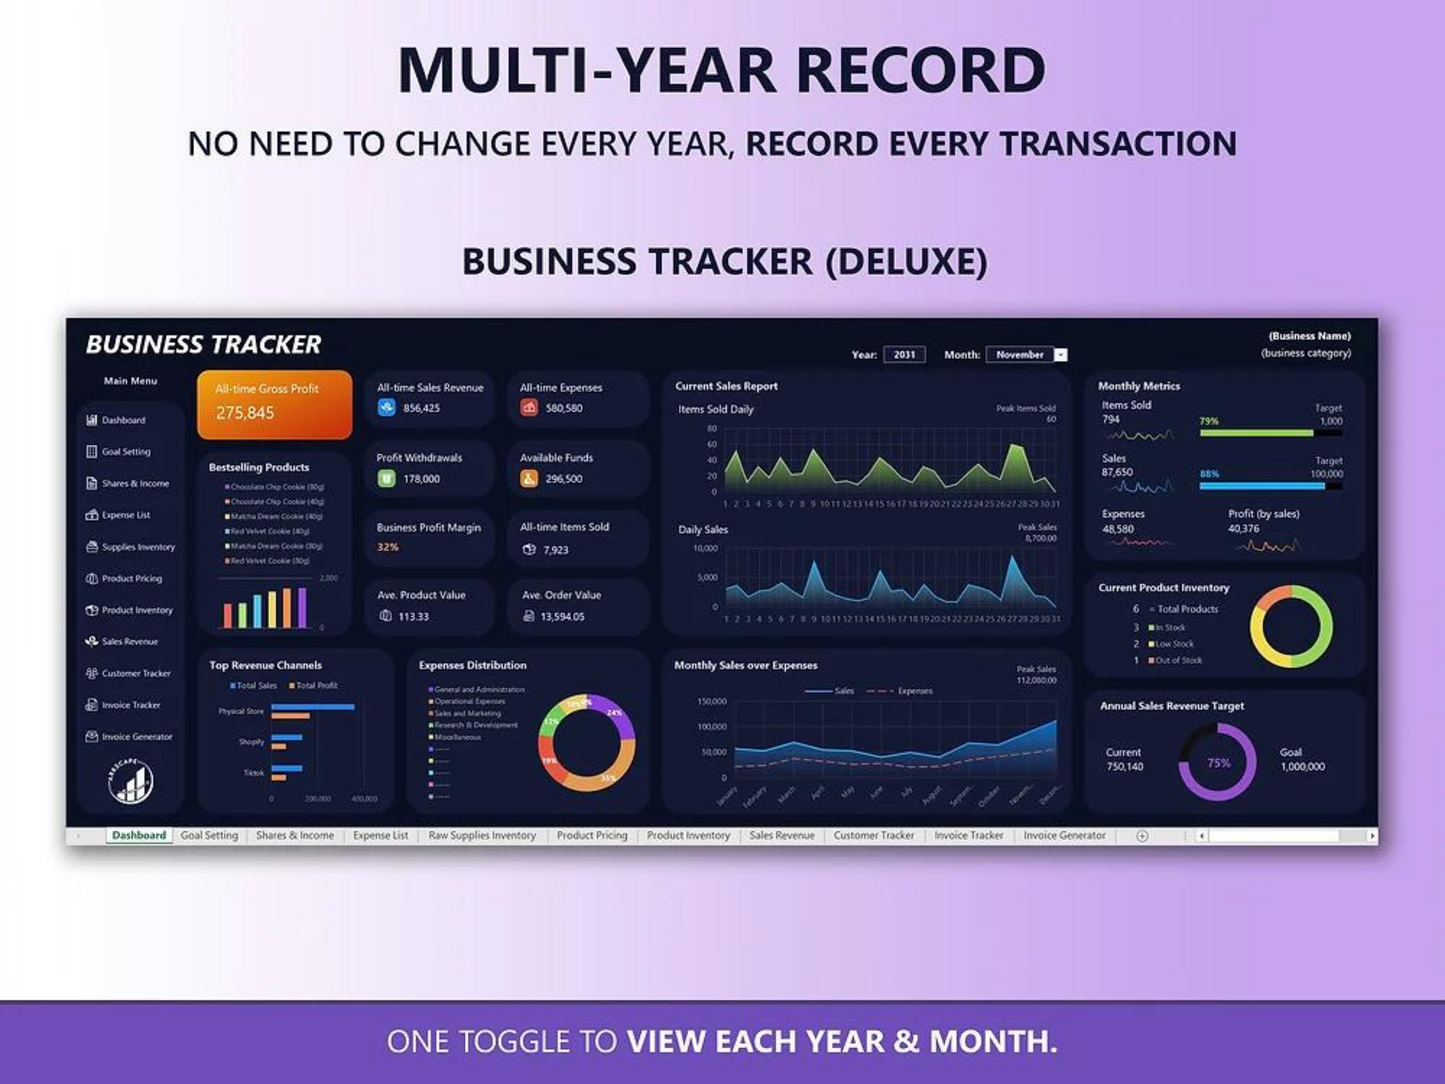 Ultimate Small Business Tracker